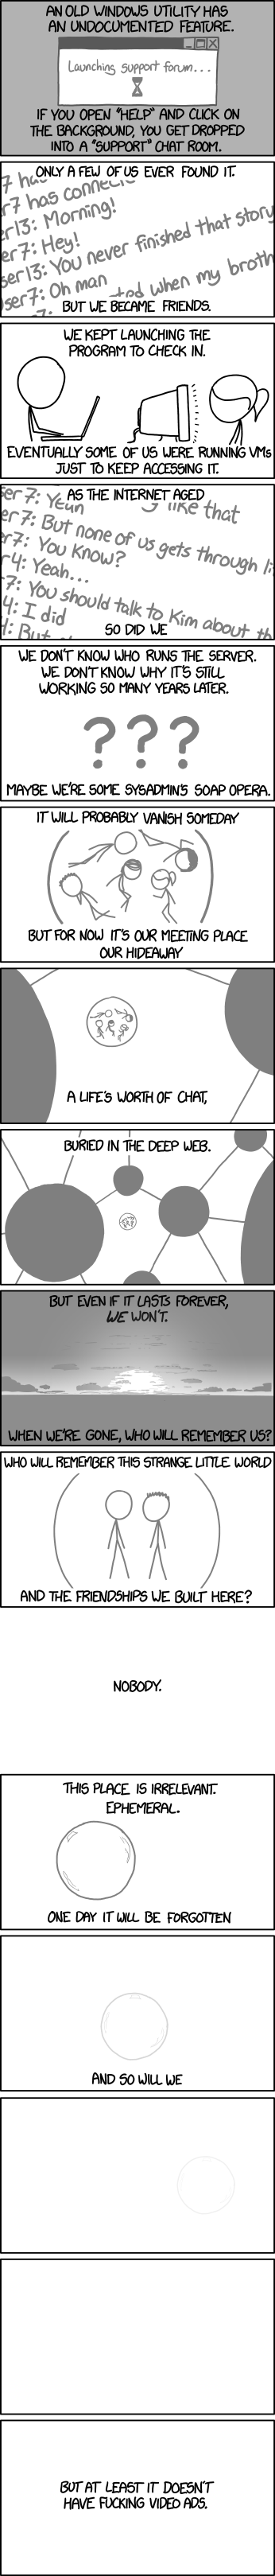 xkcd: undocumented feature